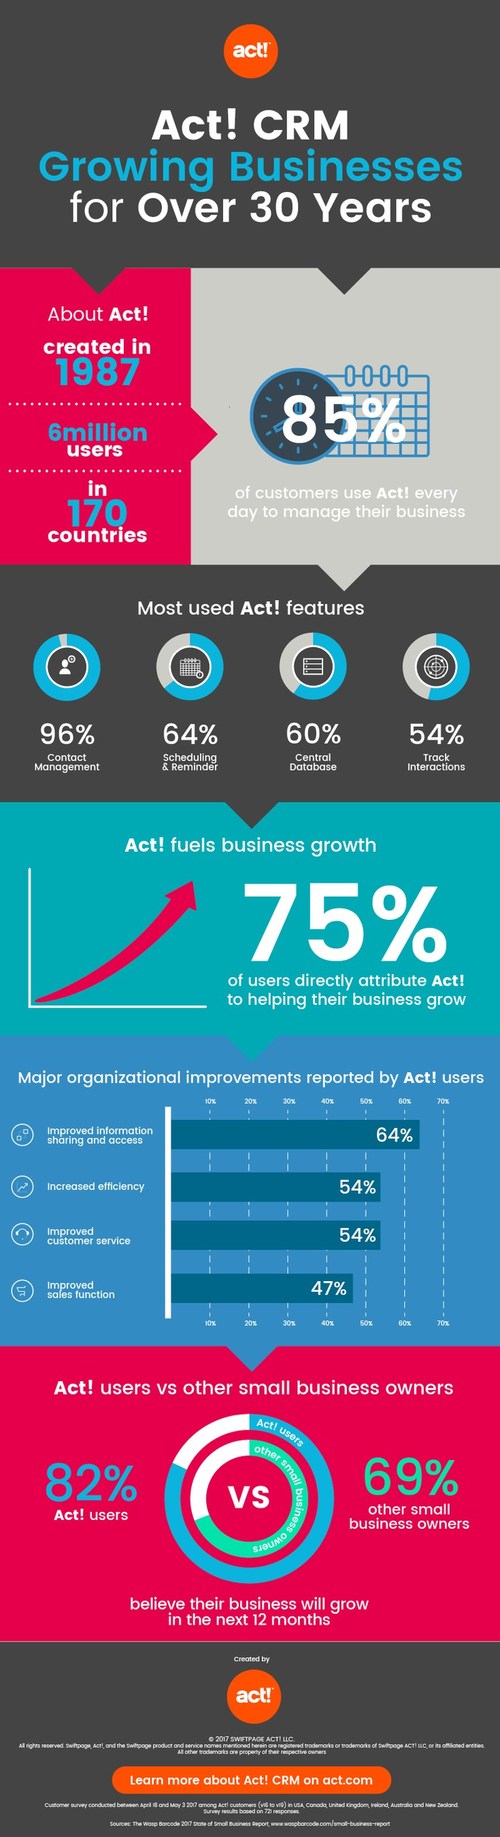 Act! CRM Growing Businesses for Over 30 Years